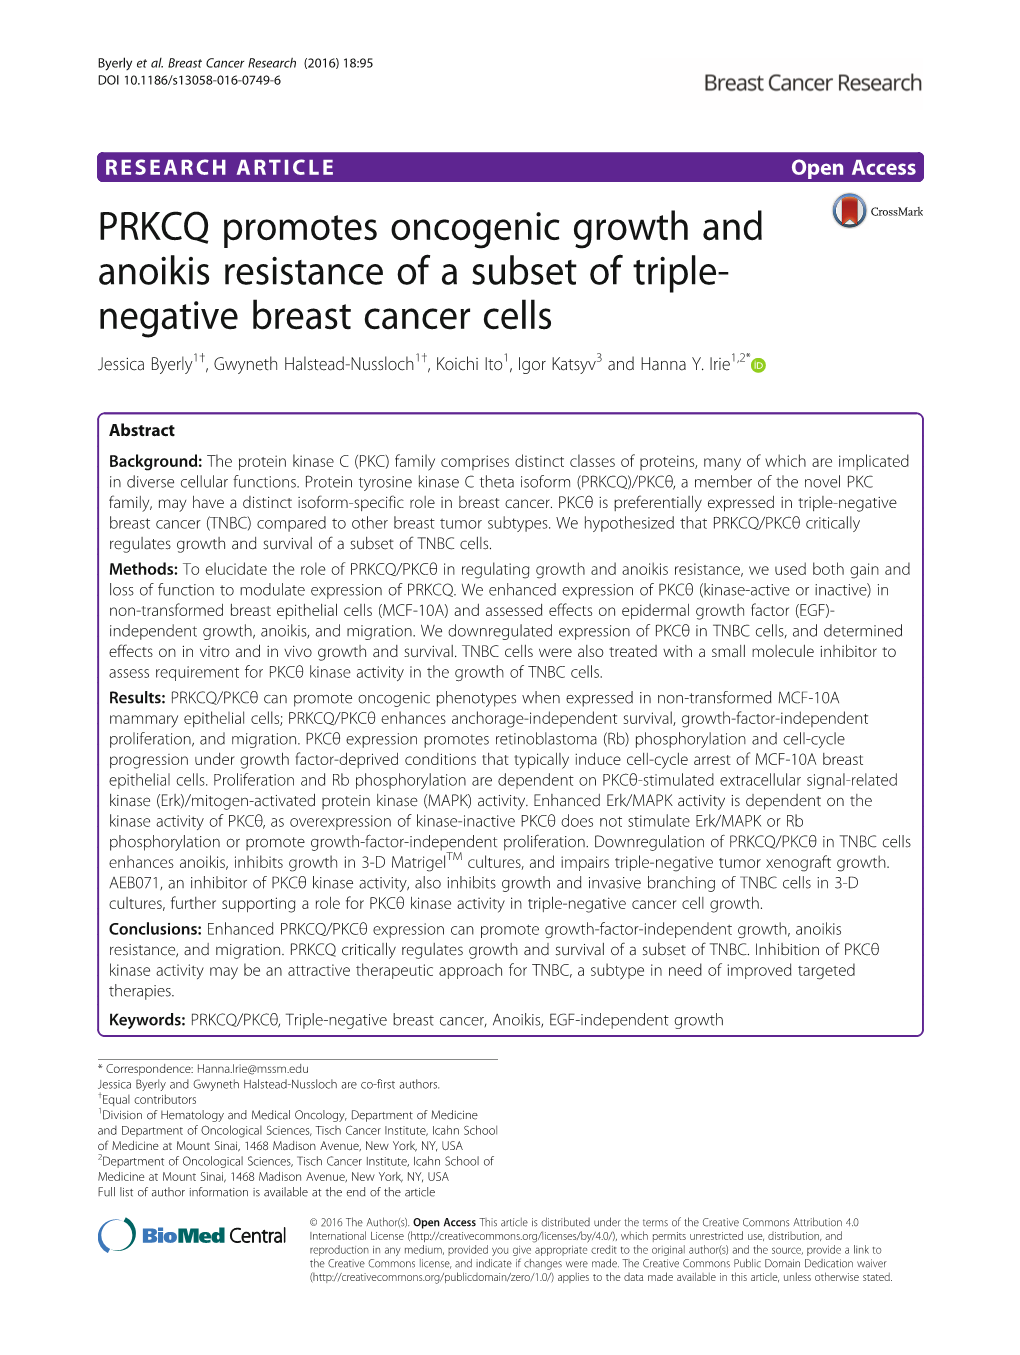 PRKCQ Promotes Oncogenic Growth and Anoikis Resistance of a Subset